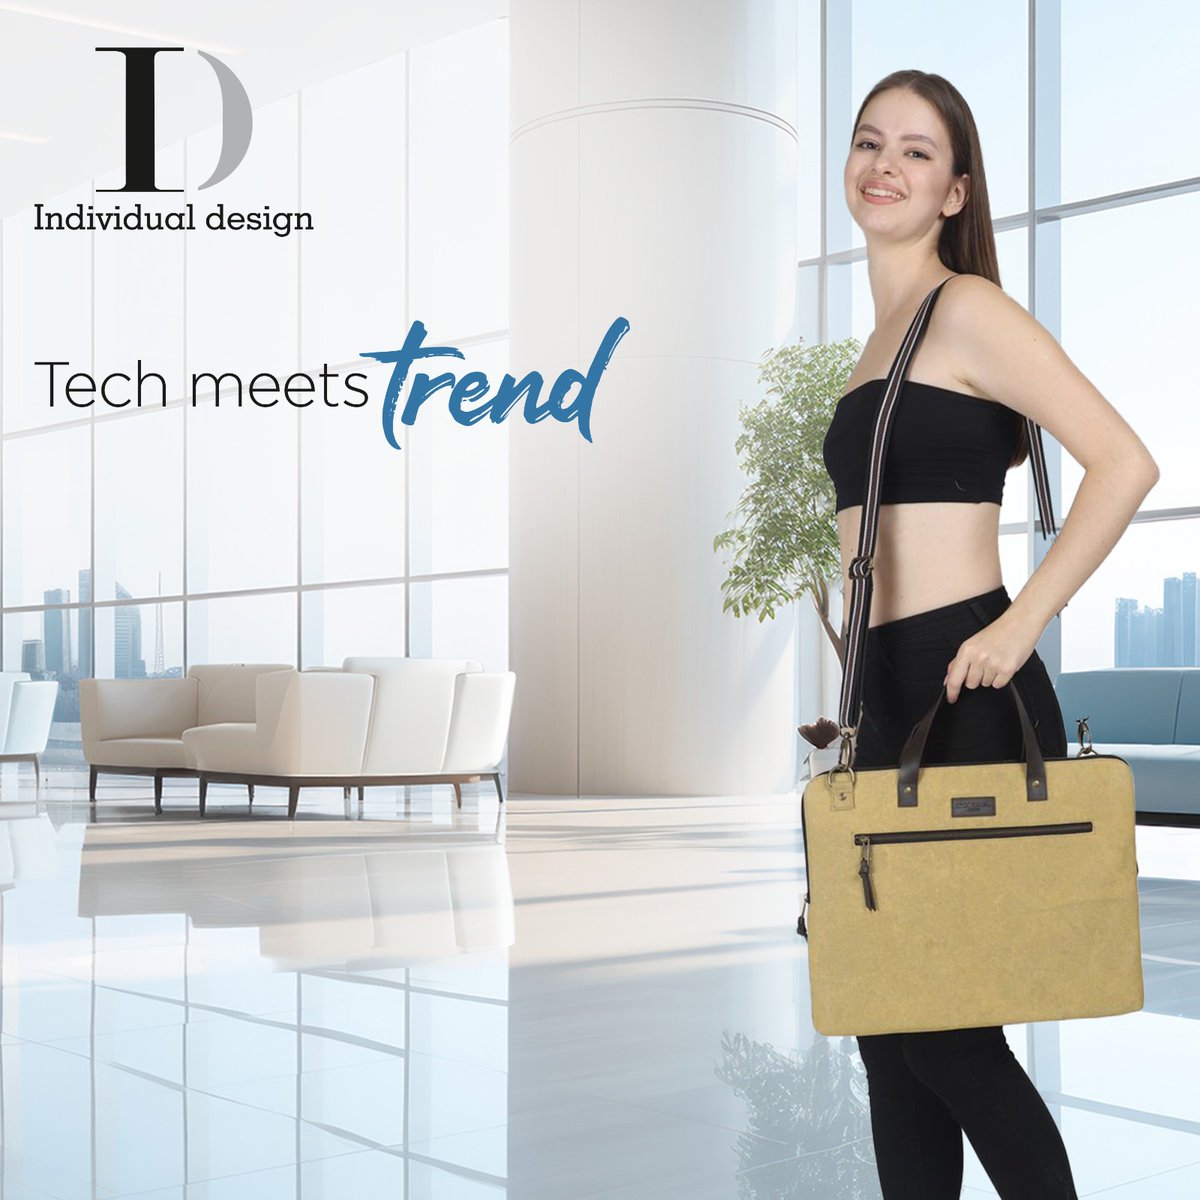 Discover the fusion of tech and trends with our ACHILLIE LAPTOP BAG. 💻✨ #TechSavvyStyle #TrendyTech #FashionTech #ModernChic #LaptopLife #IndividualDesign #OnTheGoStyle #FashionEssentials #TechMeetsTrend